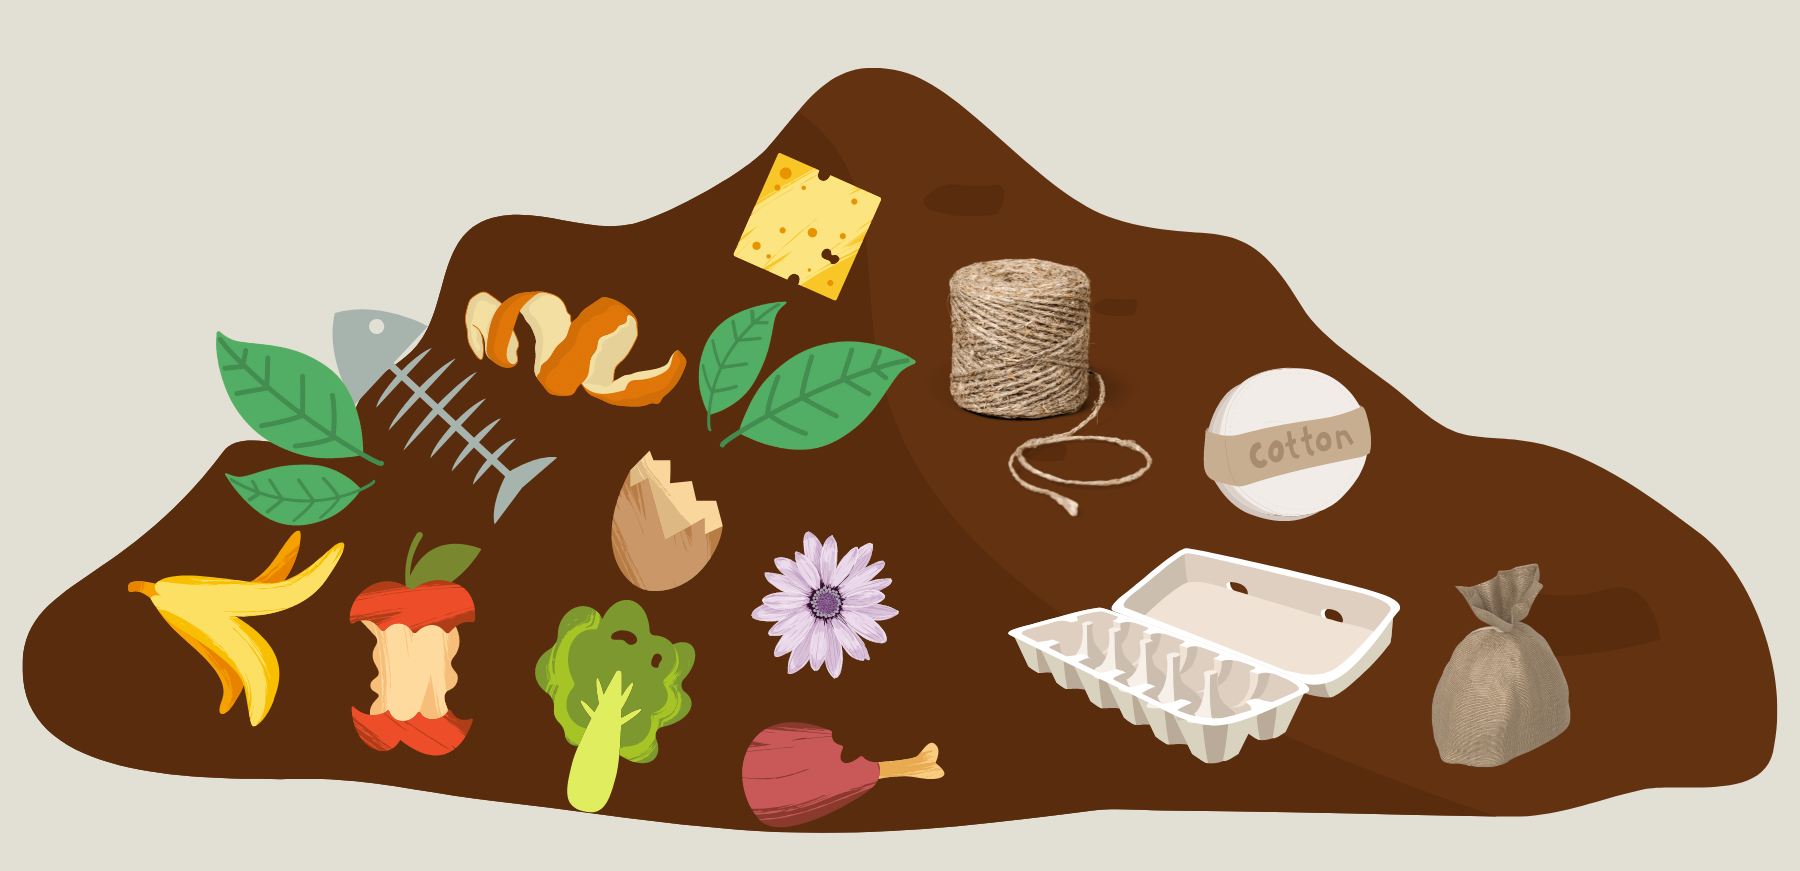 Graphic illustration of a compost pile showing a selection of plant and animal based products that can be added safely.